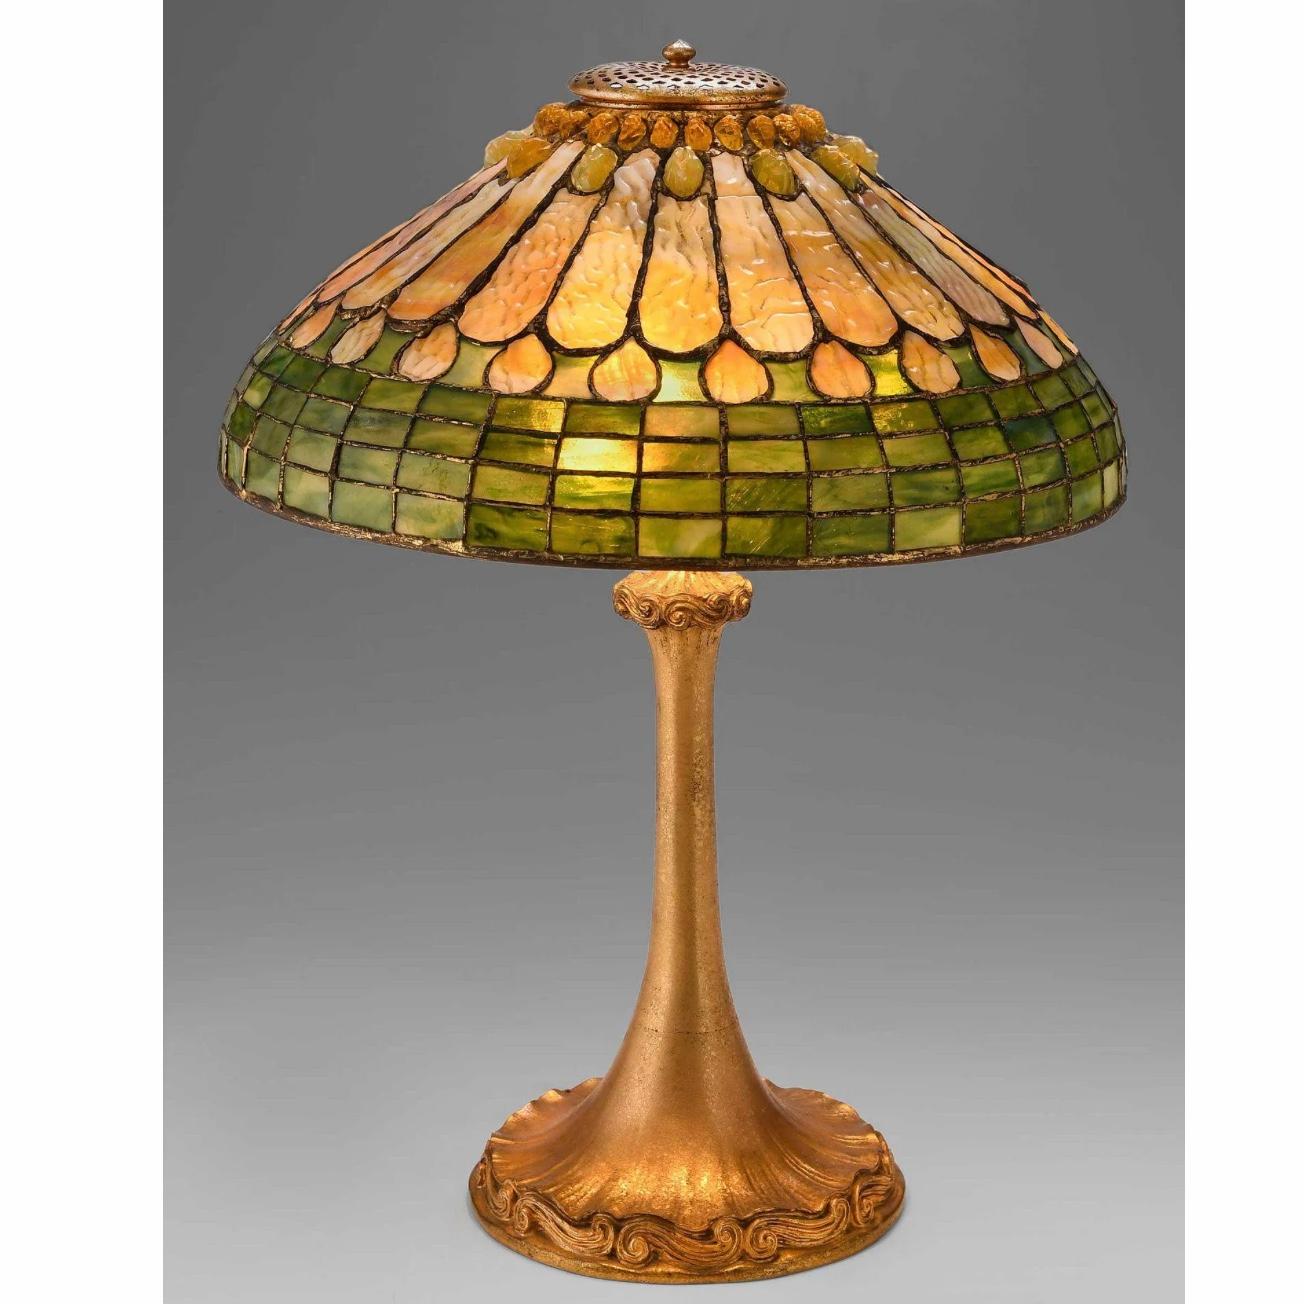 Tiffany Studios Jeweled Feather Table Lamp.

New York, Circa 1910 
Base signed TIFFANY STUDIOS NEW YORK 584, Height 22 Inches
Shade signed TIFFANY STUDIOS NEW YORK 1439, Diameter 16.25 Inches

Mottled glass shade in variegated cream, green, and